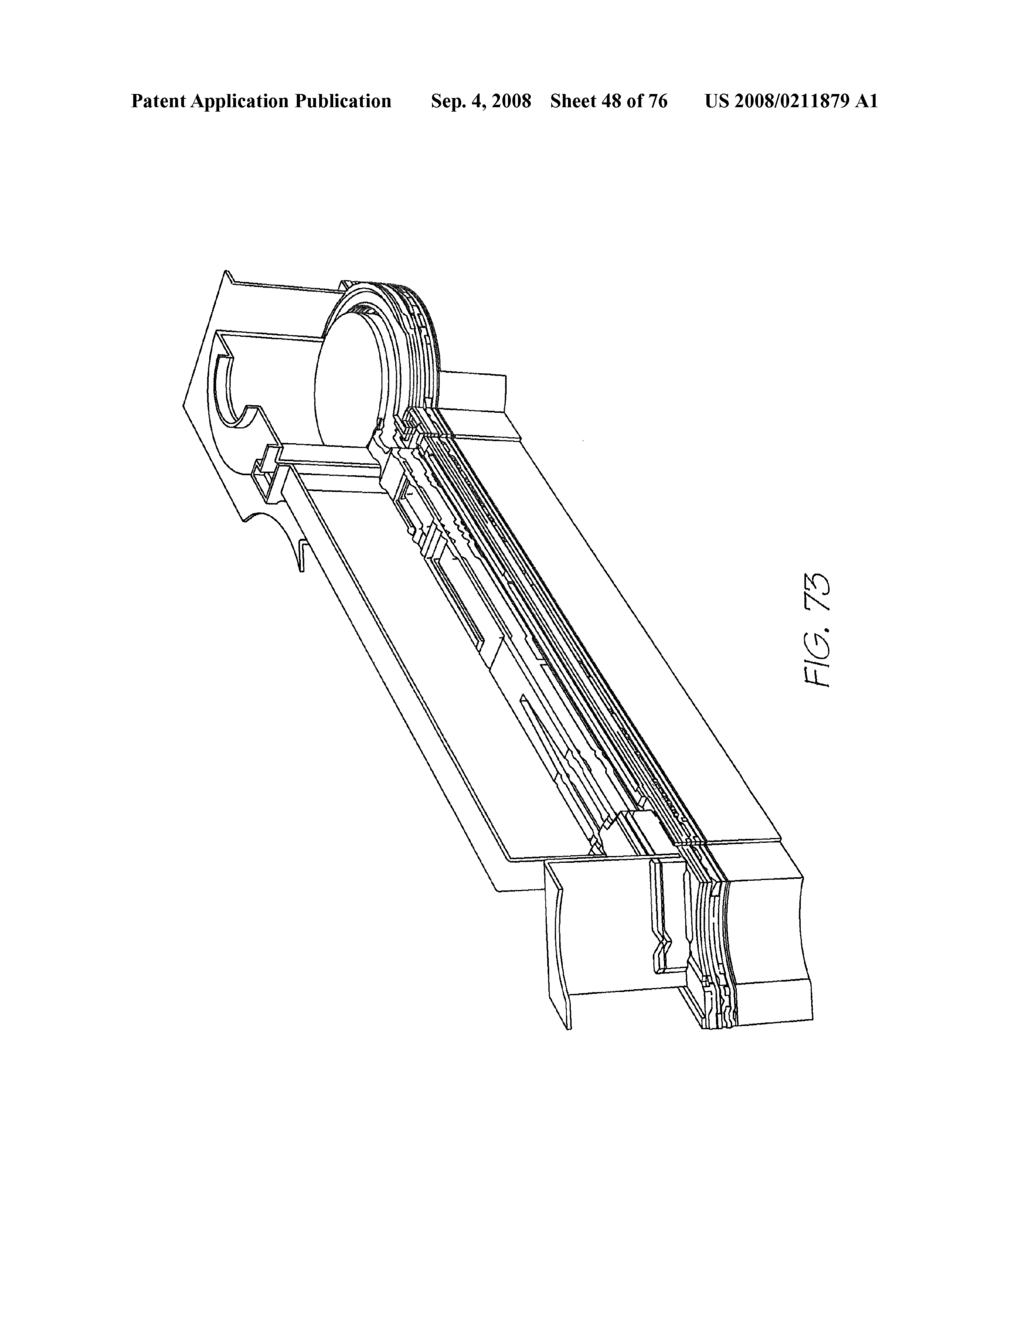 Pagewidth inkjet printhead assembly with nozzle arrangements having actuator arms configured to be in thermal balance when in a quiescent state - diagram, schematic, and image 49